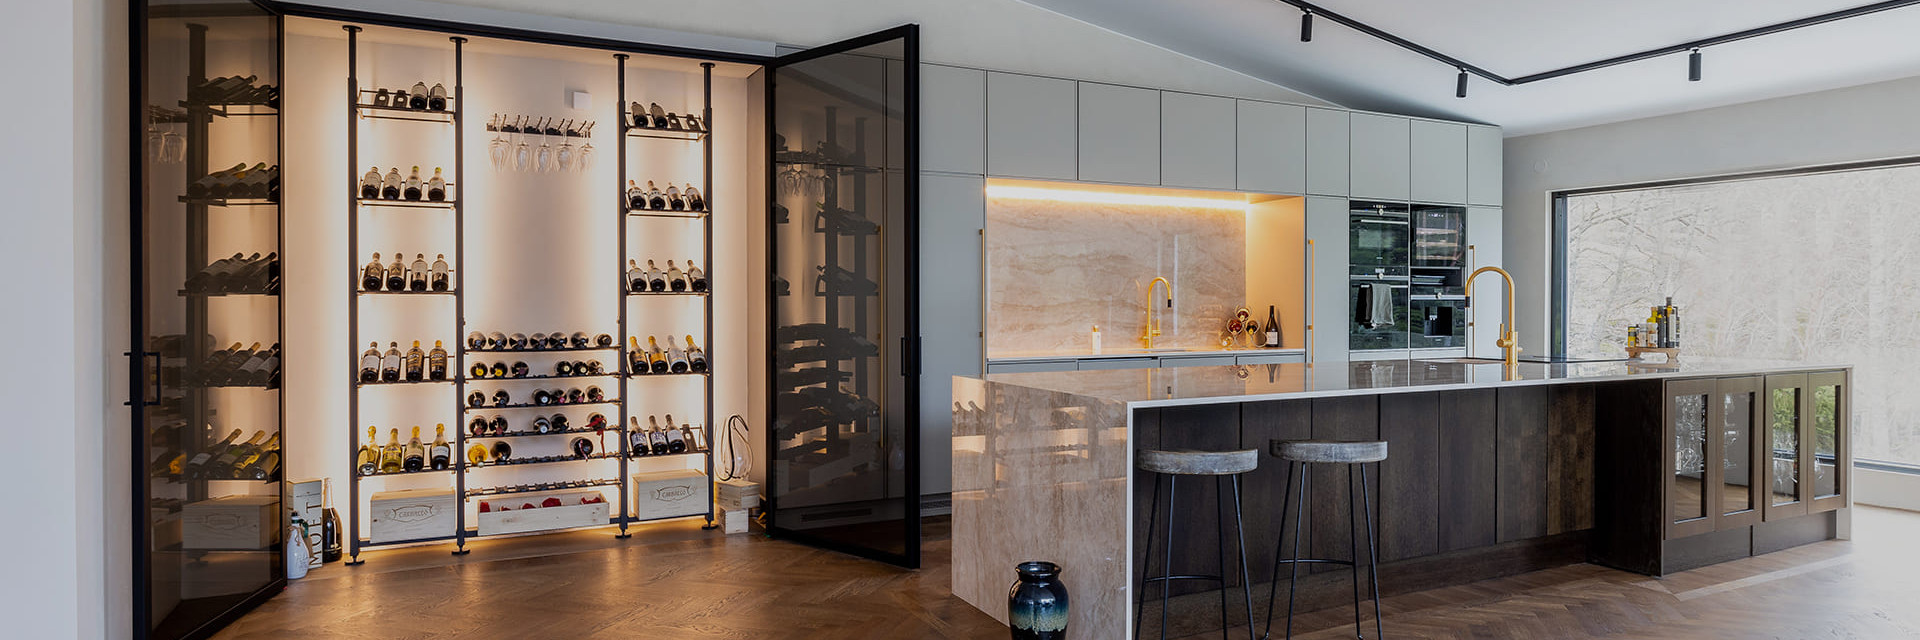  Interior design project - Layout of a custom wine cellar - wine space with black metal wine storage installed in a niche in the wall of a luxury kitchen.